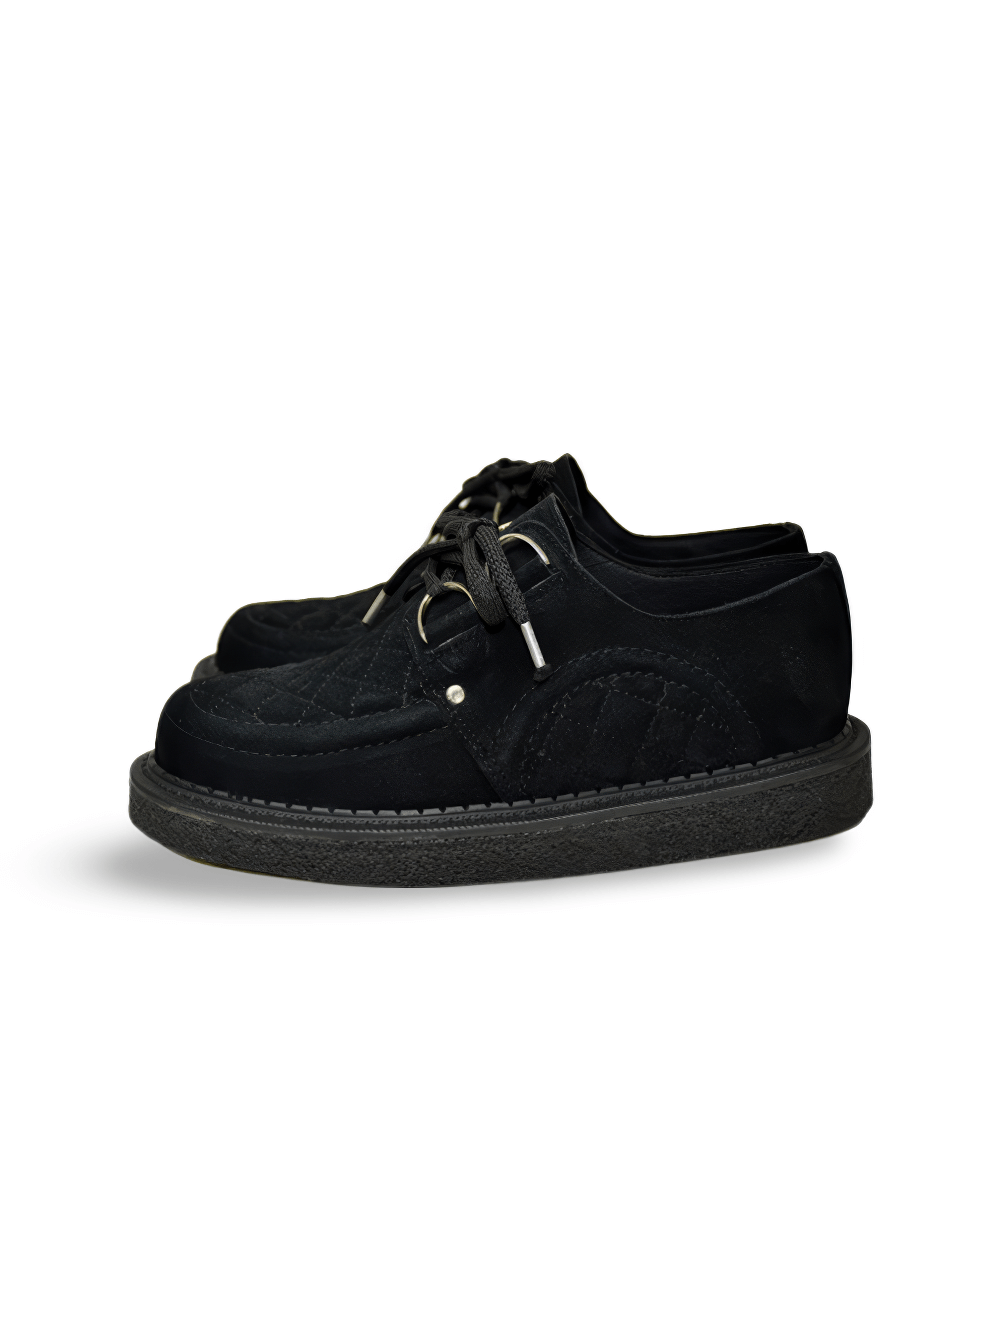 Round Toe Creepers Shoes in Navy and Black Colors Suede